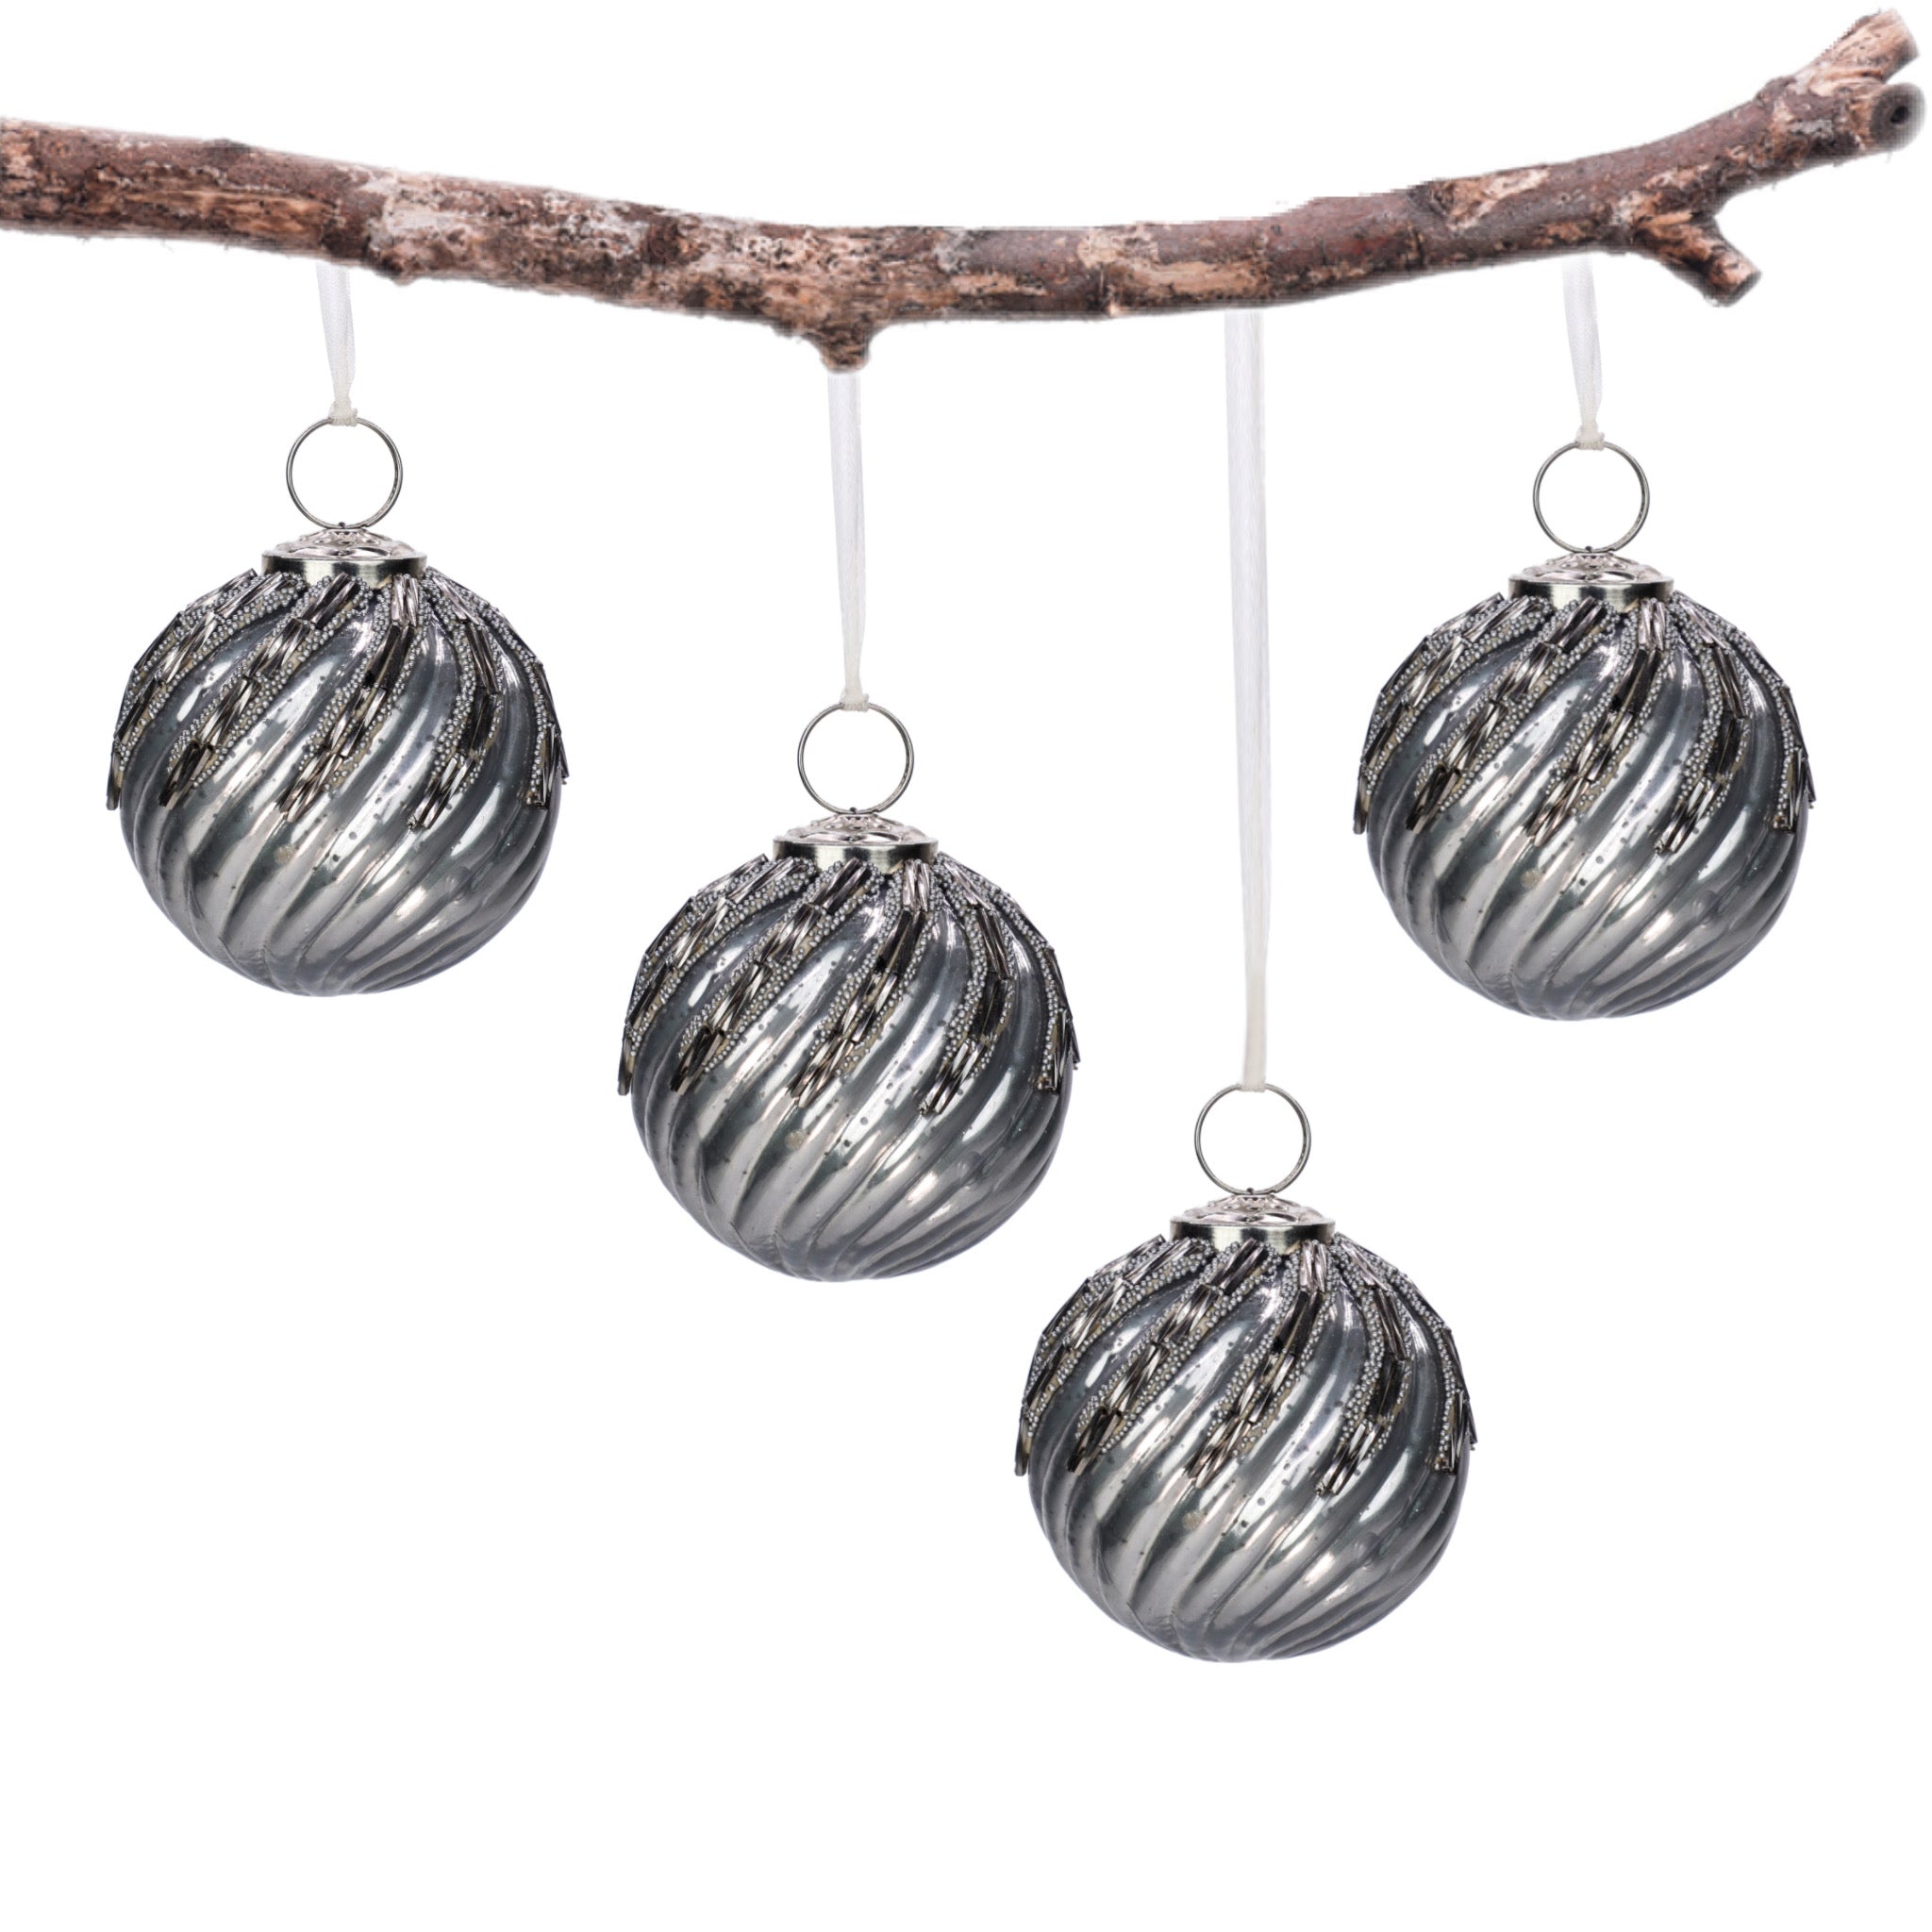 Timeless Classic Glass Tree Ornament in Silver & Grey, Boxed Set of 4